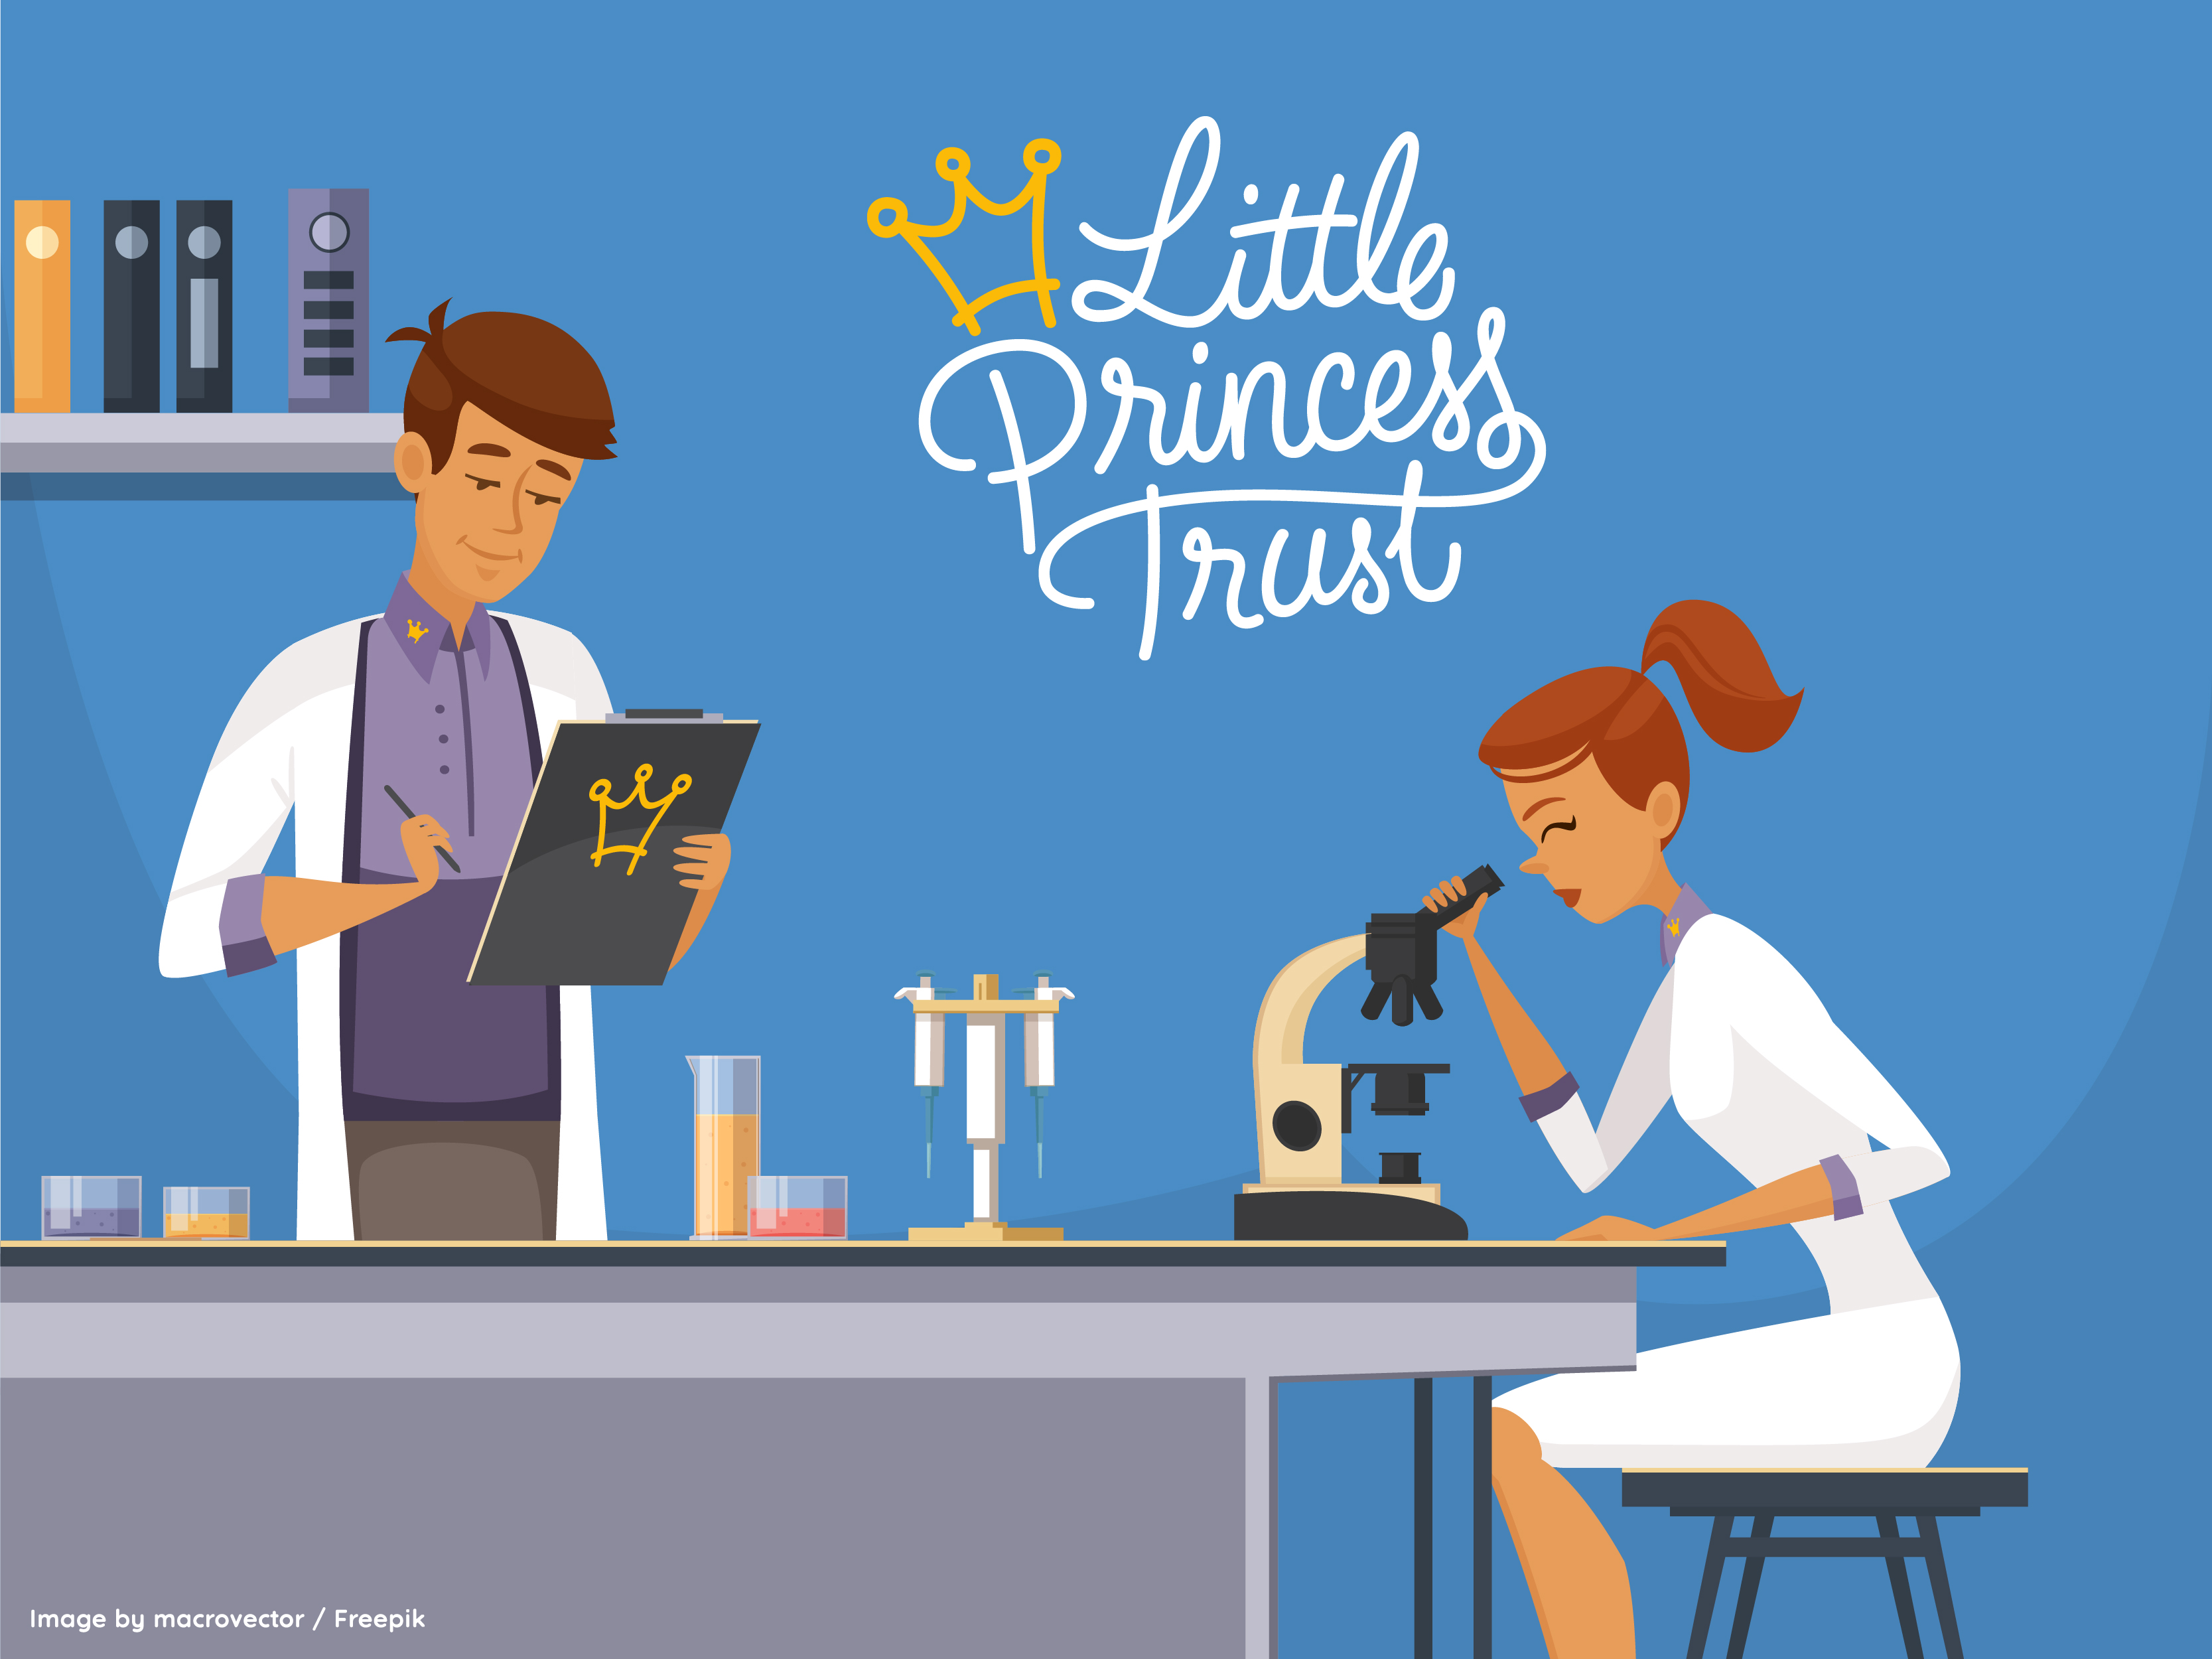 The Little Princess Trust began funding childhood cancer research in 2016.